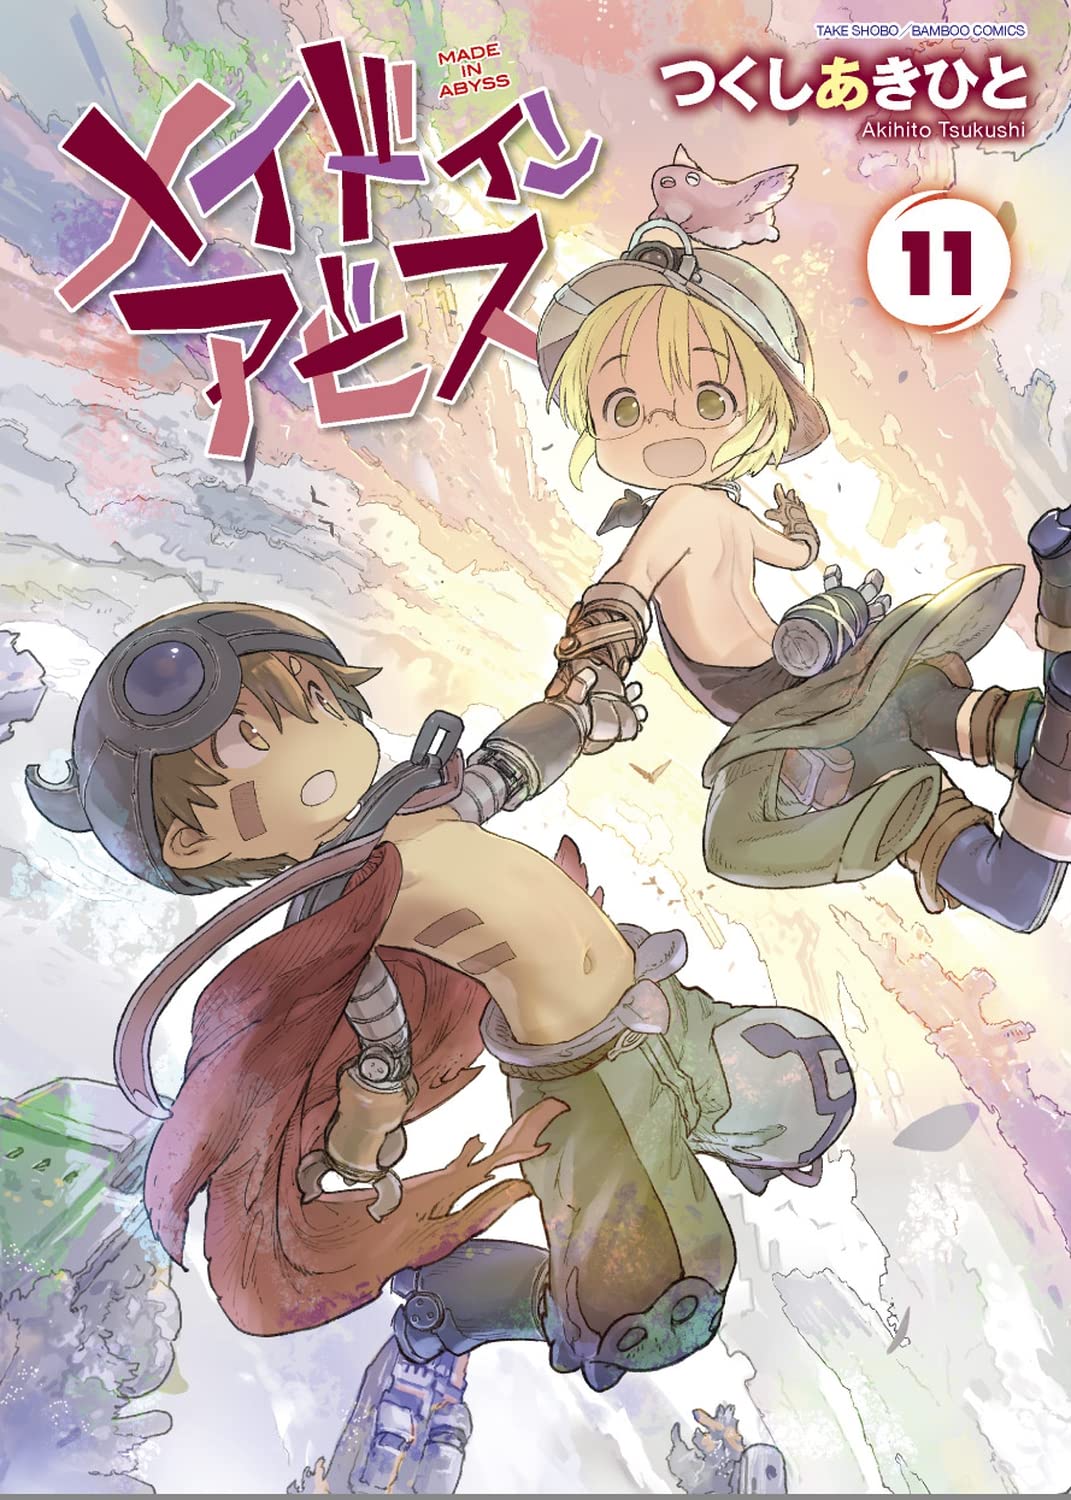 Made in Abyss Side Story Chapter 002, Made in Abyss Wiki